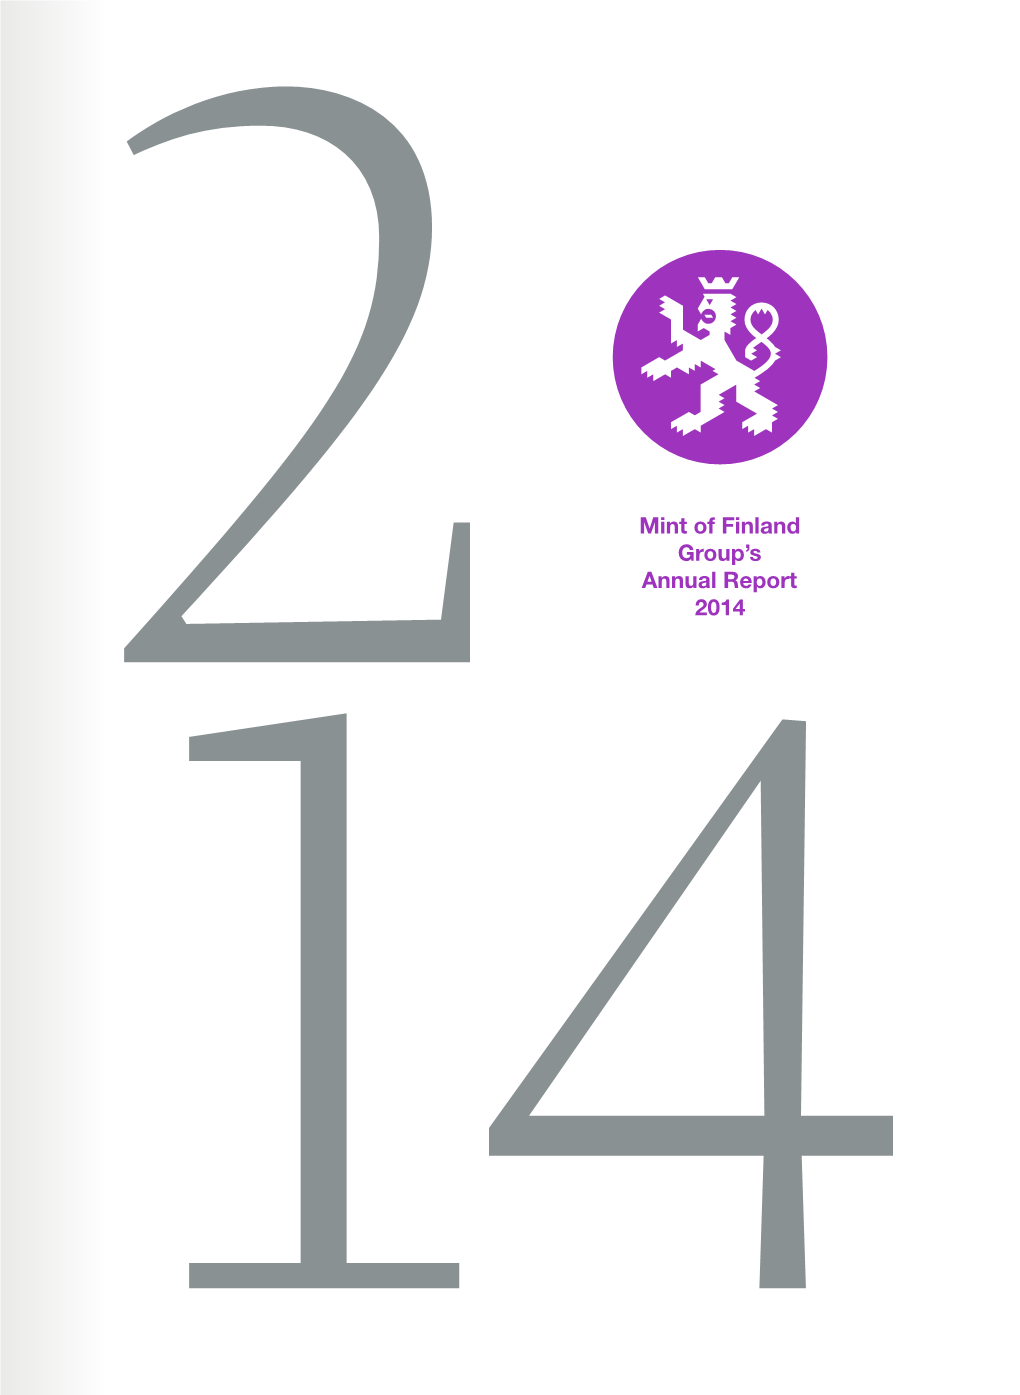 Mint of Finland Group's Annual Report 2014